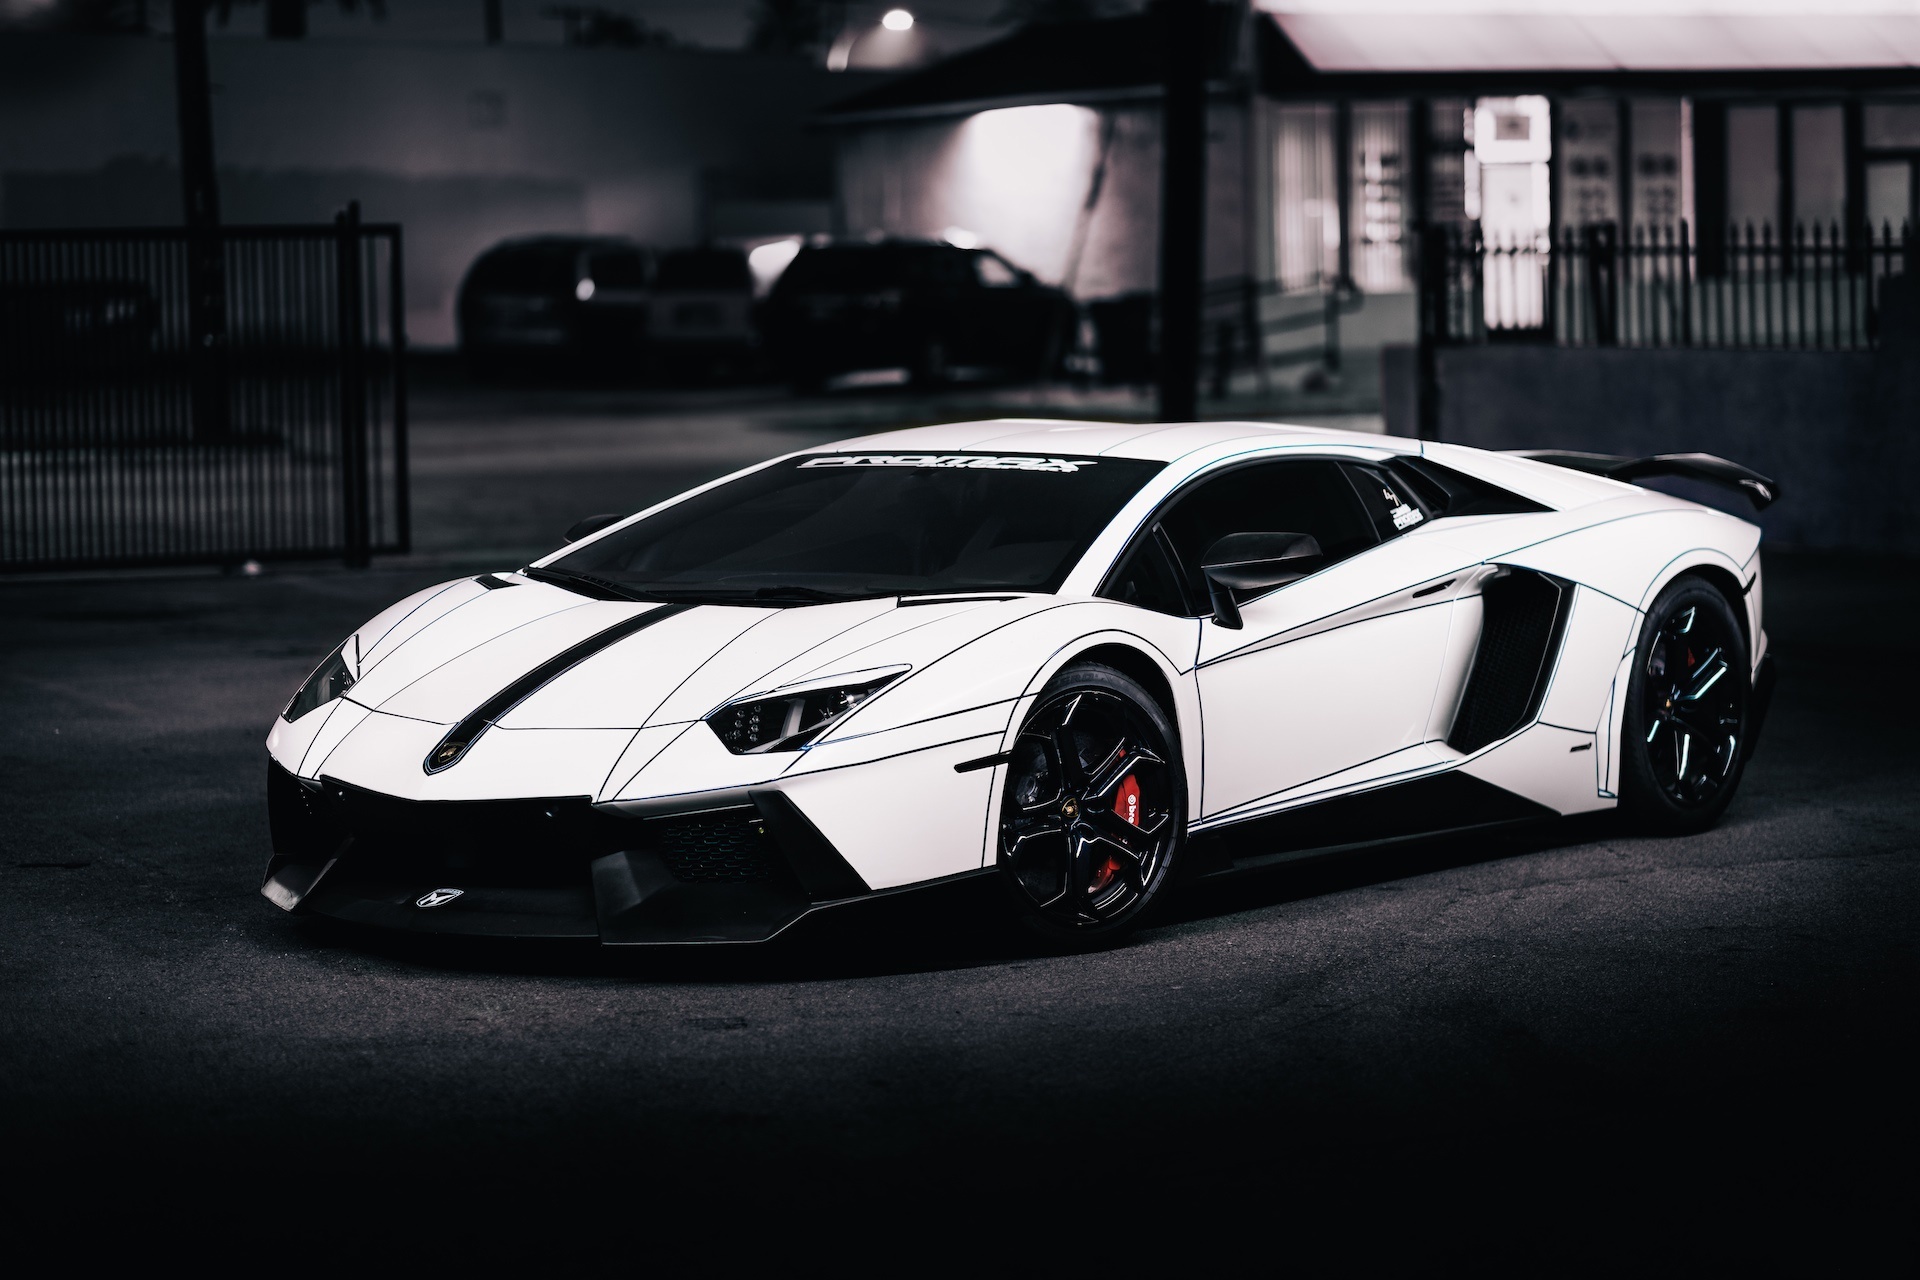 62741 download wallpaper lamborghini, cars, white, 2014, side view, aventador, lp700-4, tron tuning screensavers and pictures for free